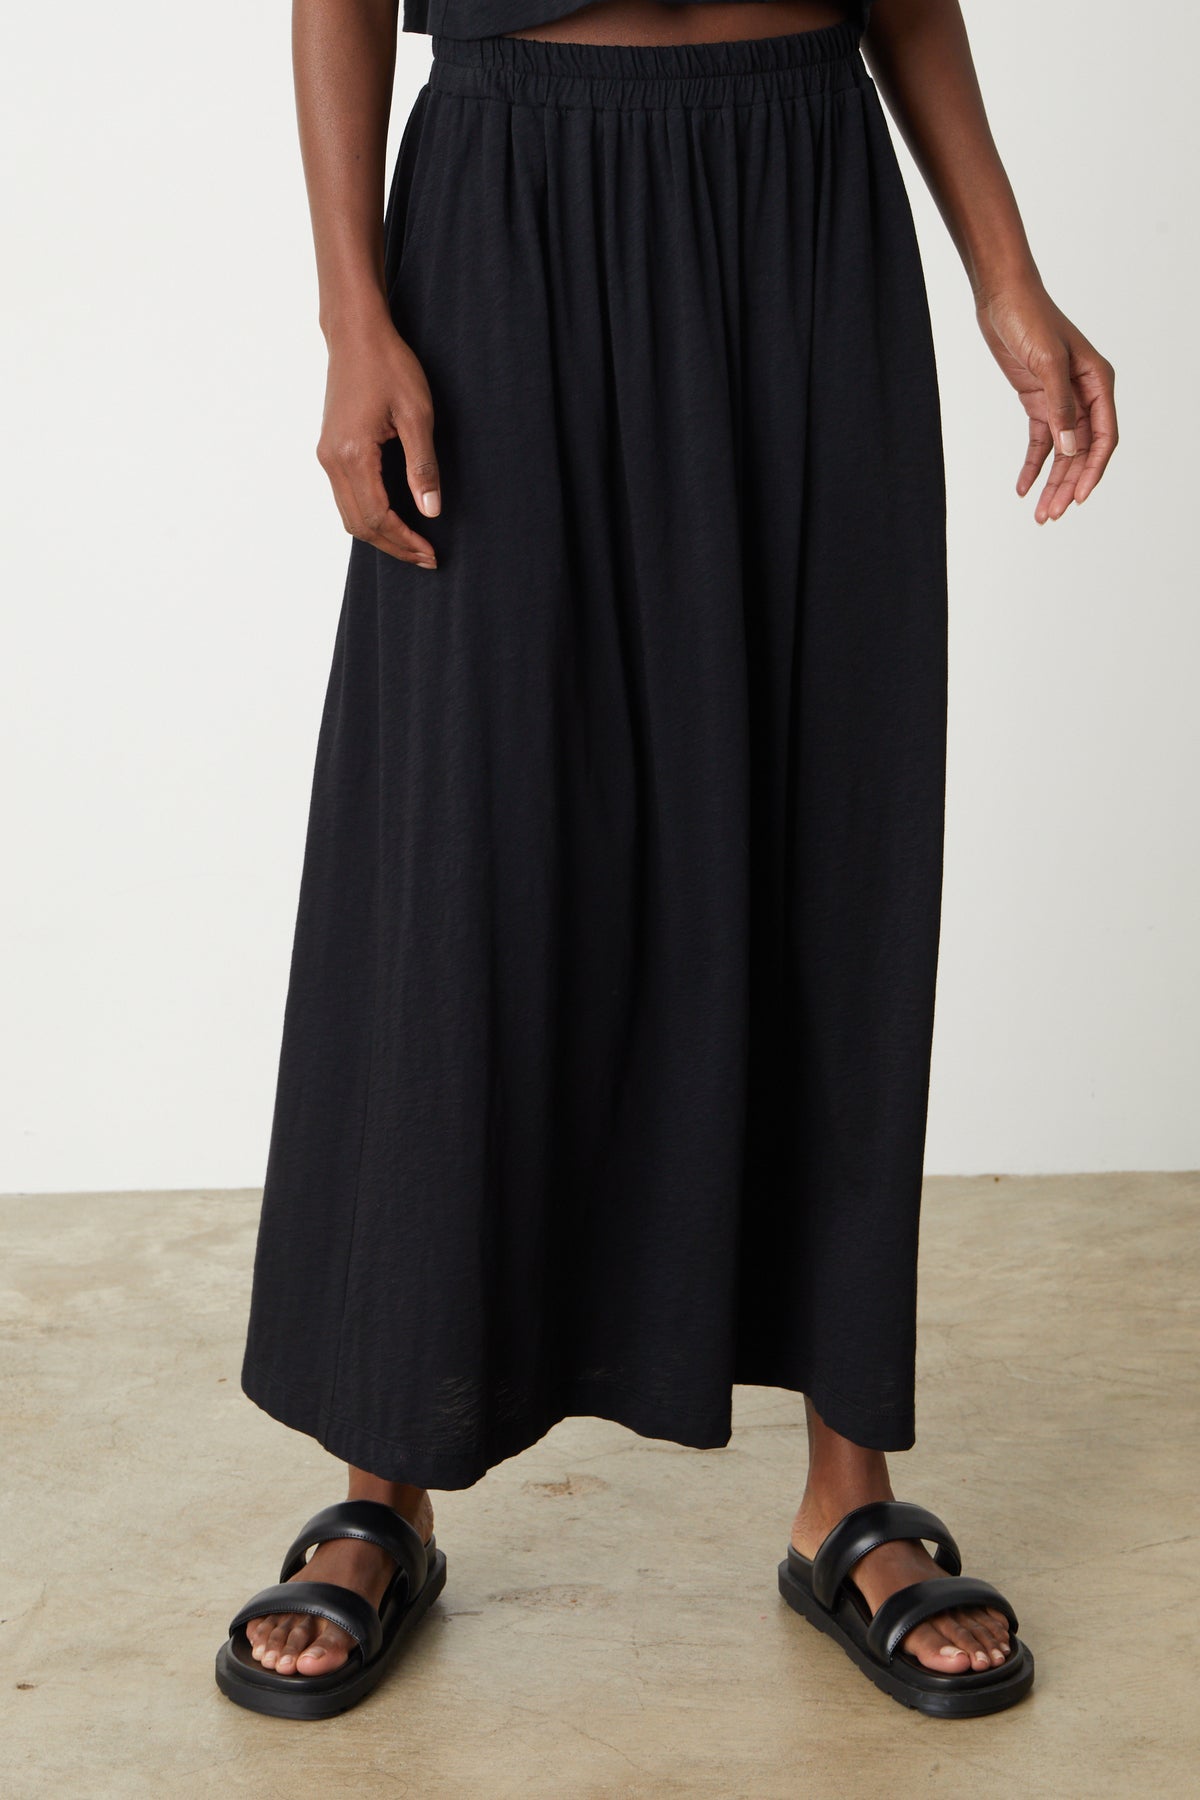 A woman wearing a Velvet by Graham & Spencer GWEN COTTON SLUB MAXI SKIRT and sandals.-26559921455297